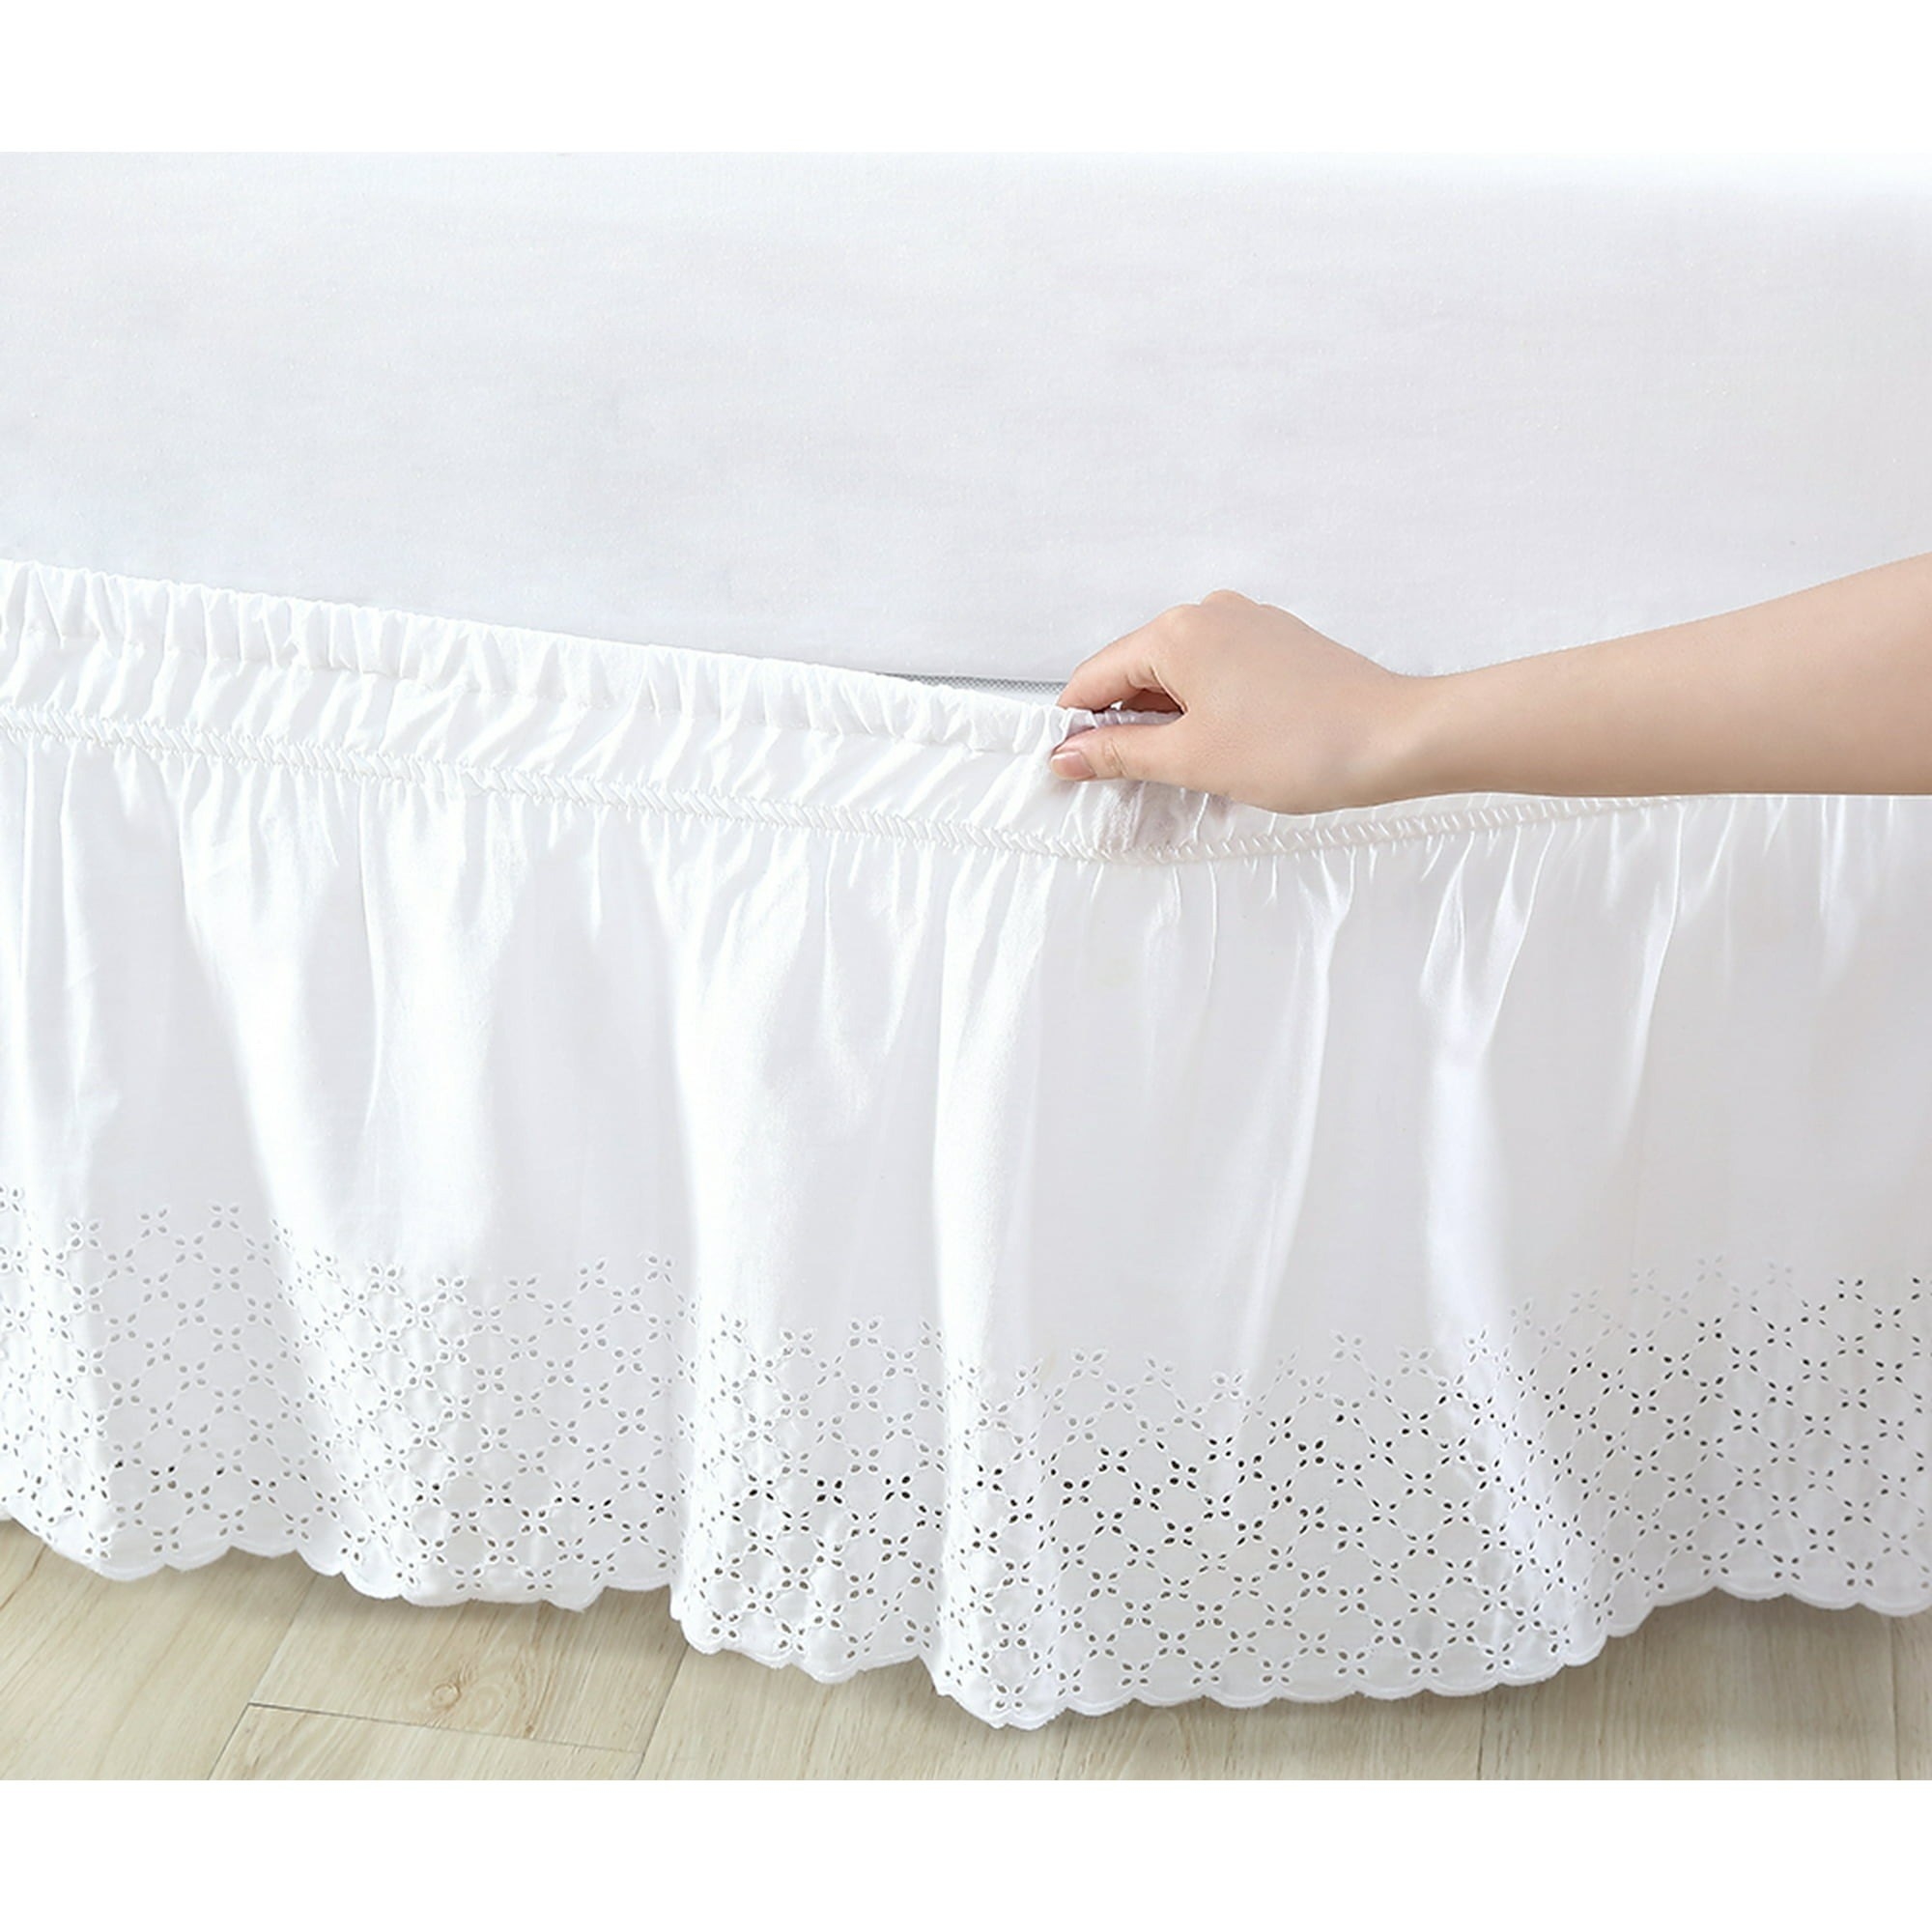 the bed skirt with an eyelet pattern on the bottom around a bed